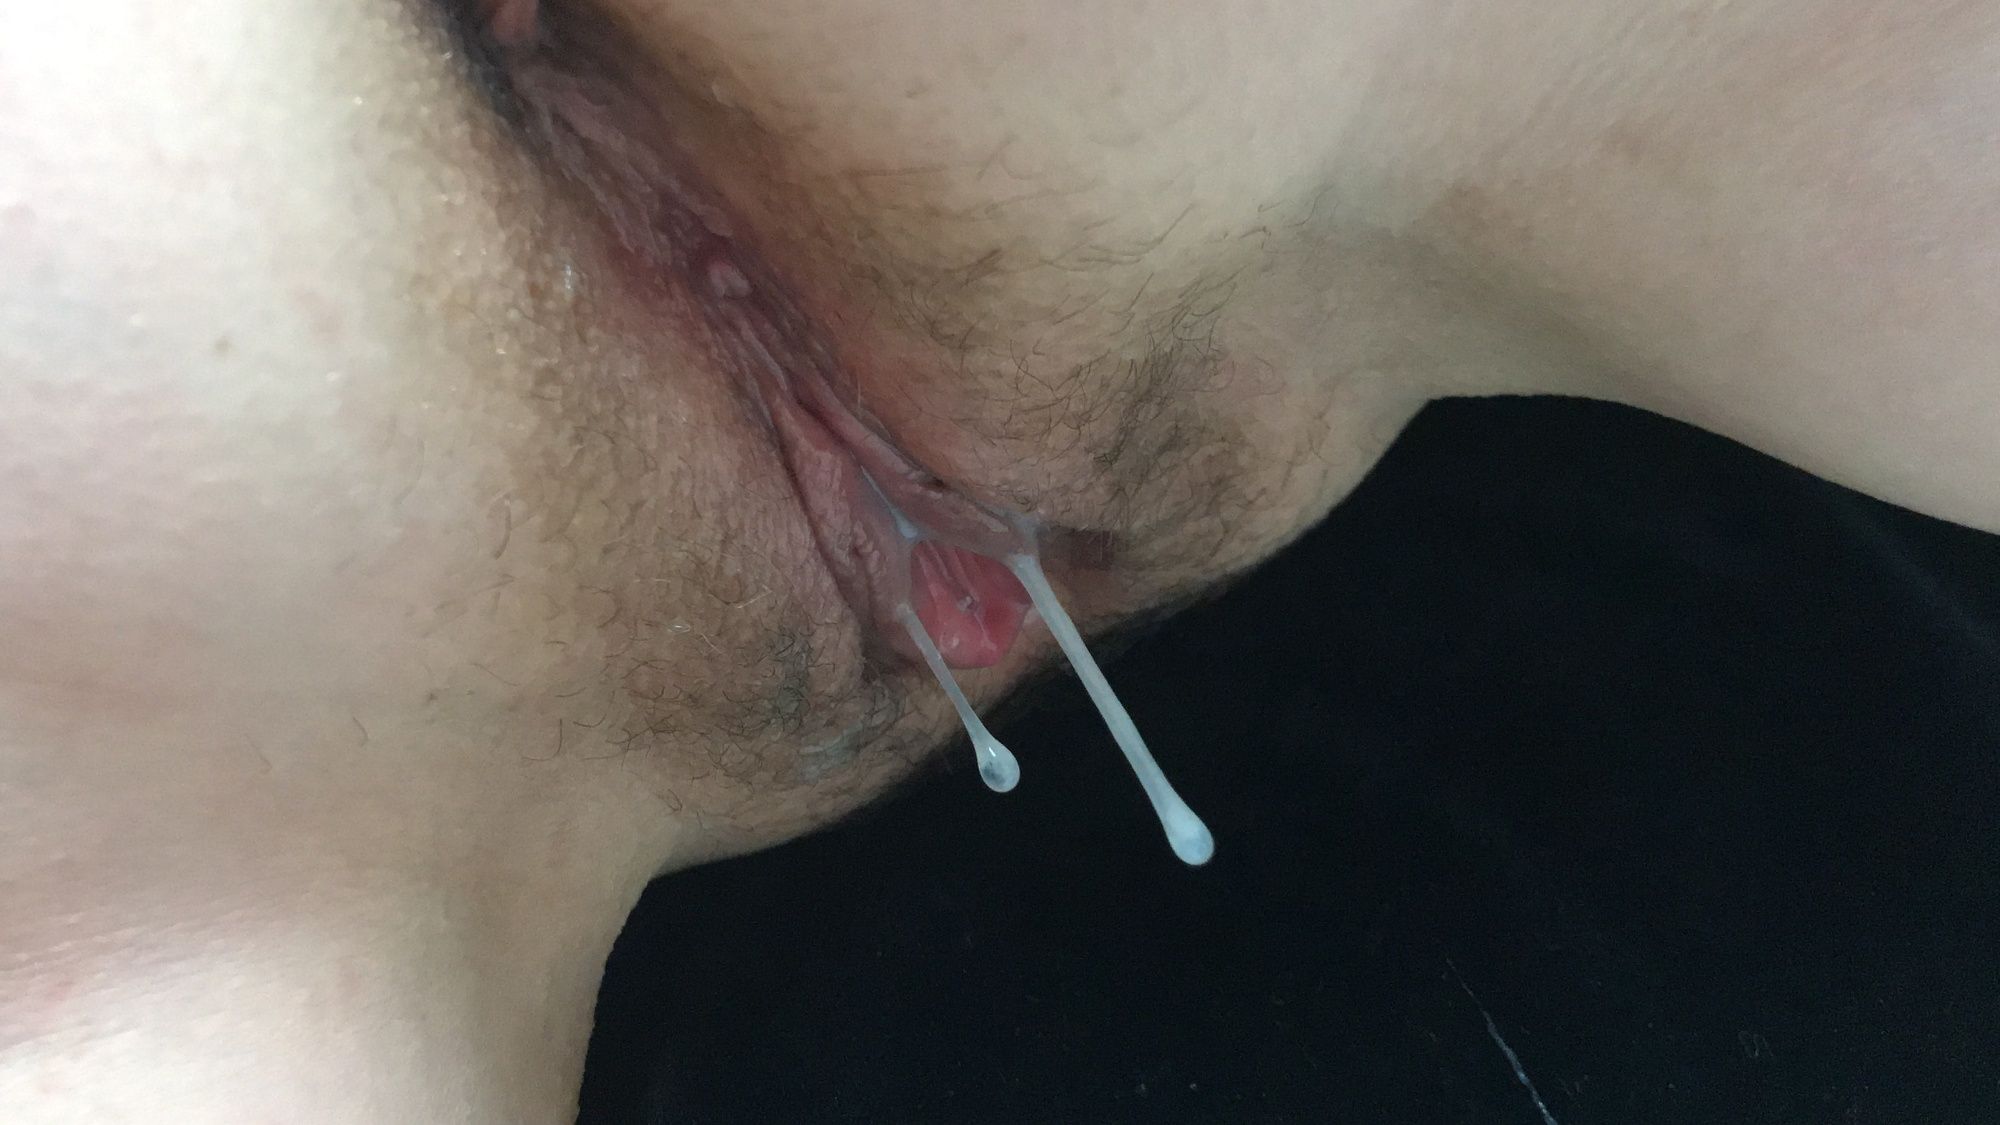 Compilation of close-ups of swollen anus and pissing pussies #28